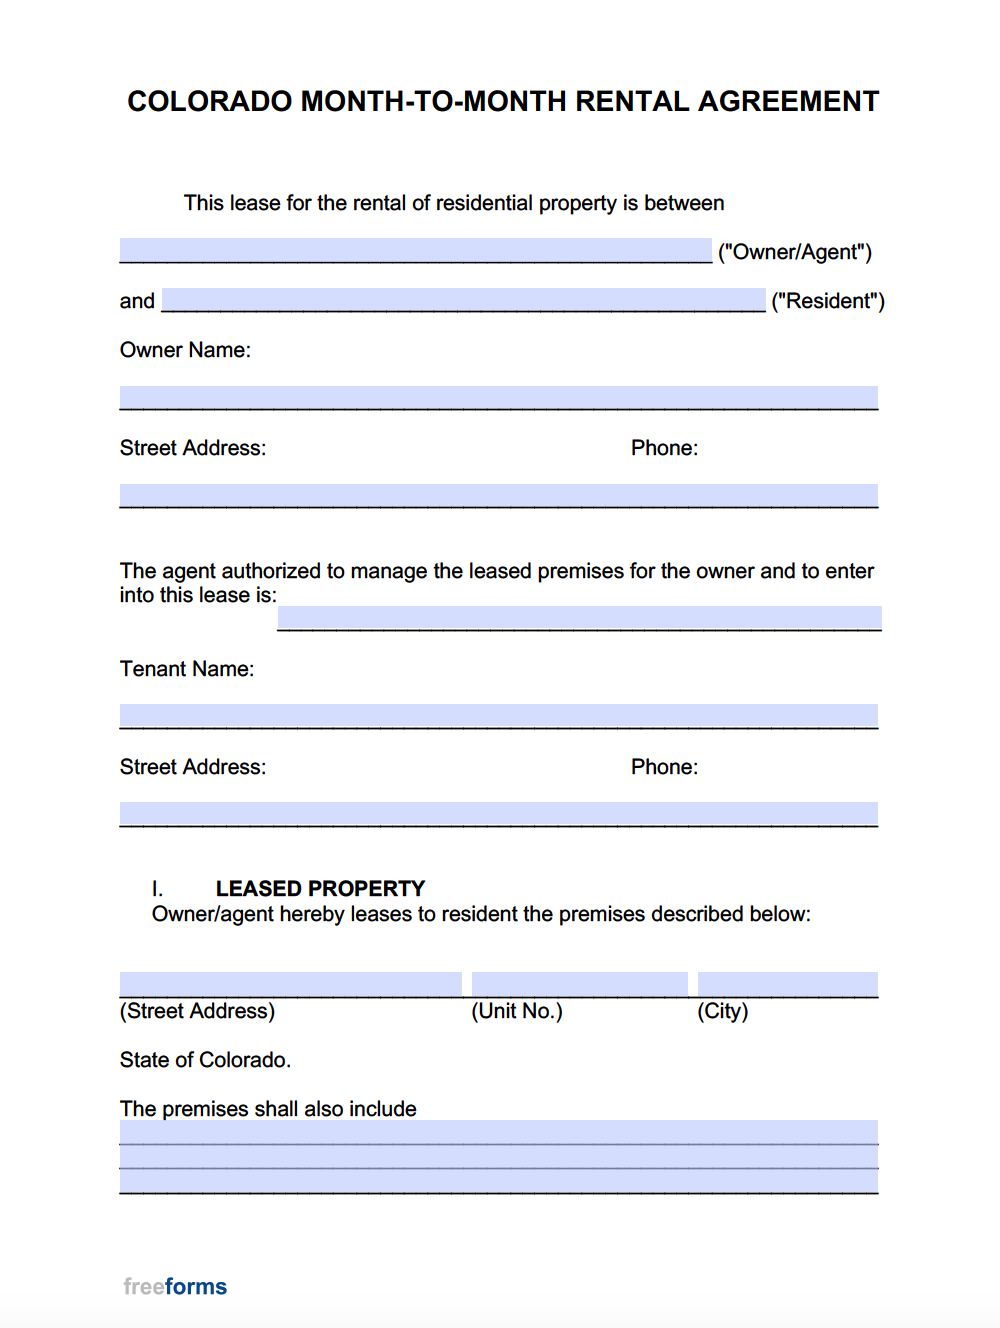 free-printable-colorado-residential-lease-agreement